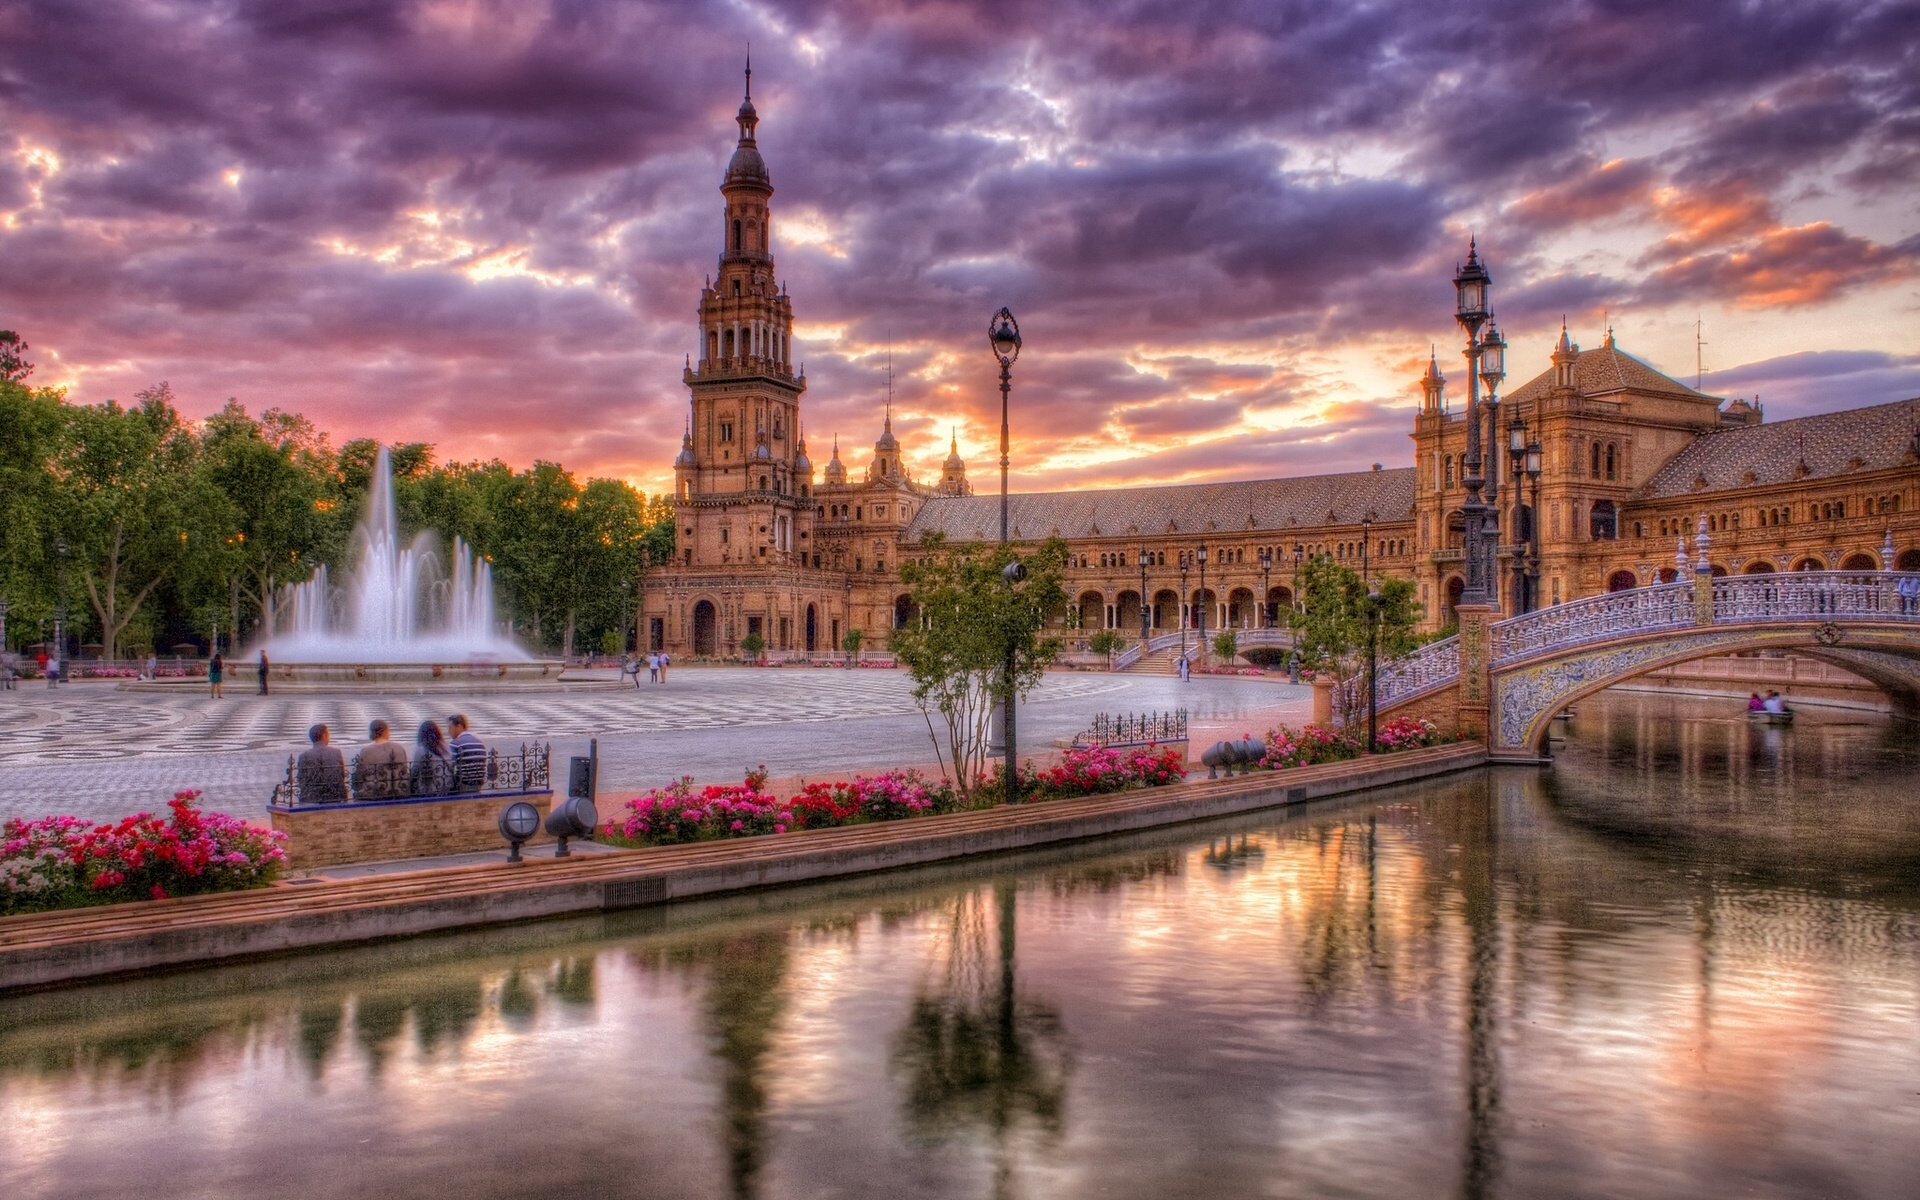 spain, hdr, royal alcazar palace, man made, palace, architecture, building, people, seville, palaces